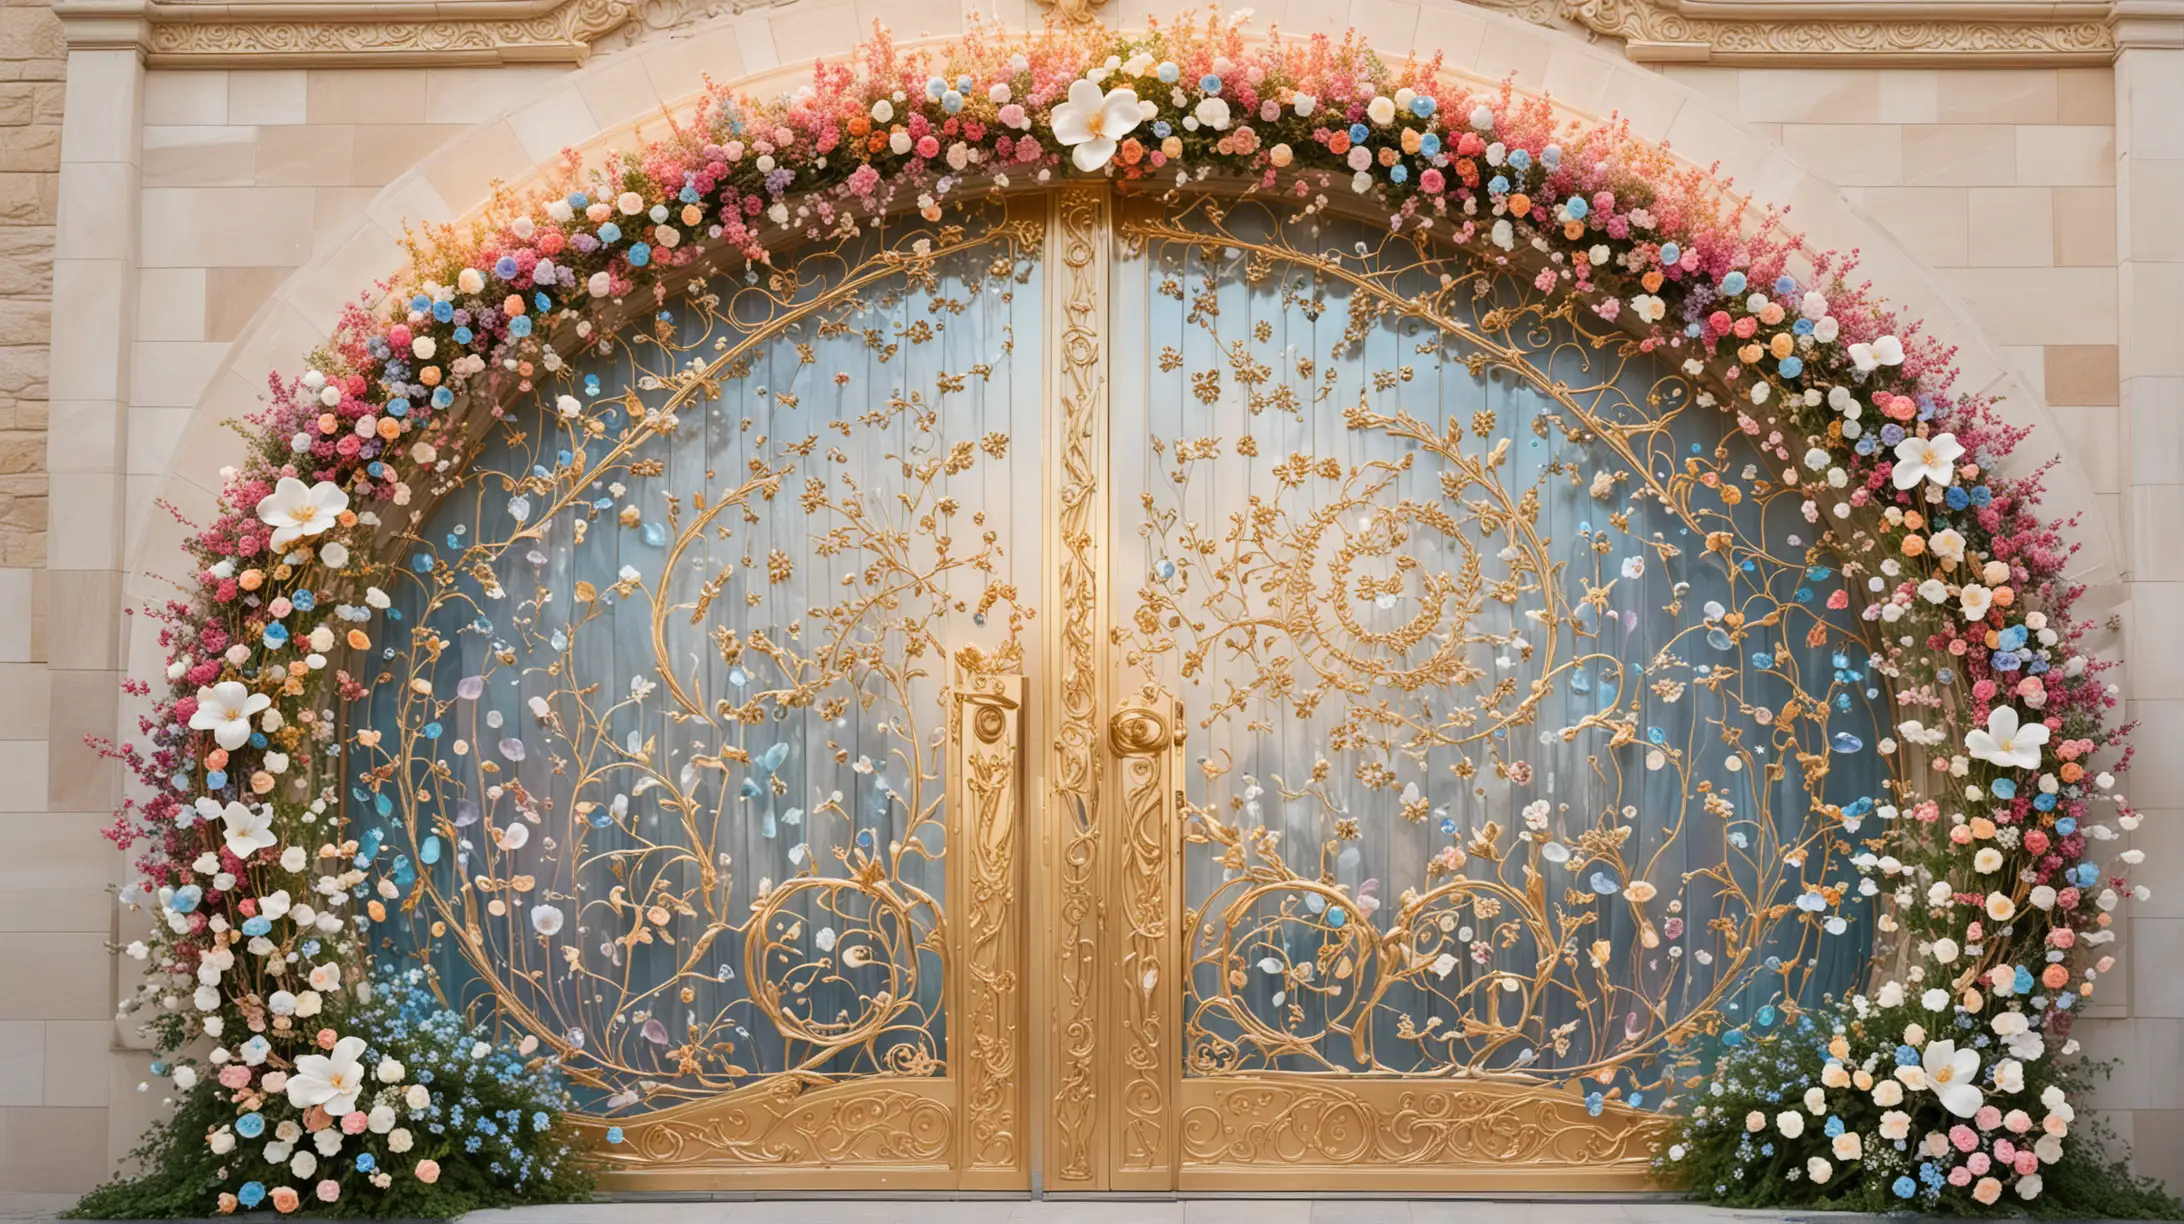 heavenly magical grand gate doors made of opal, moonstone, crystal, gold, flower vines in pastel rainbow colors